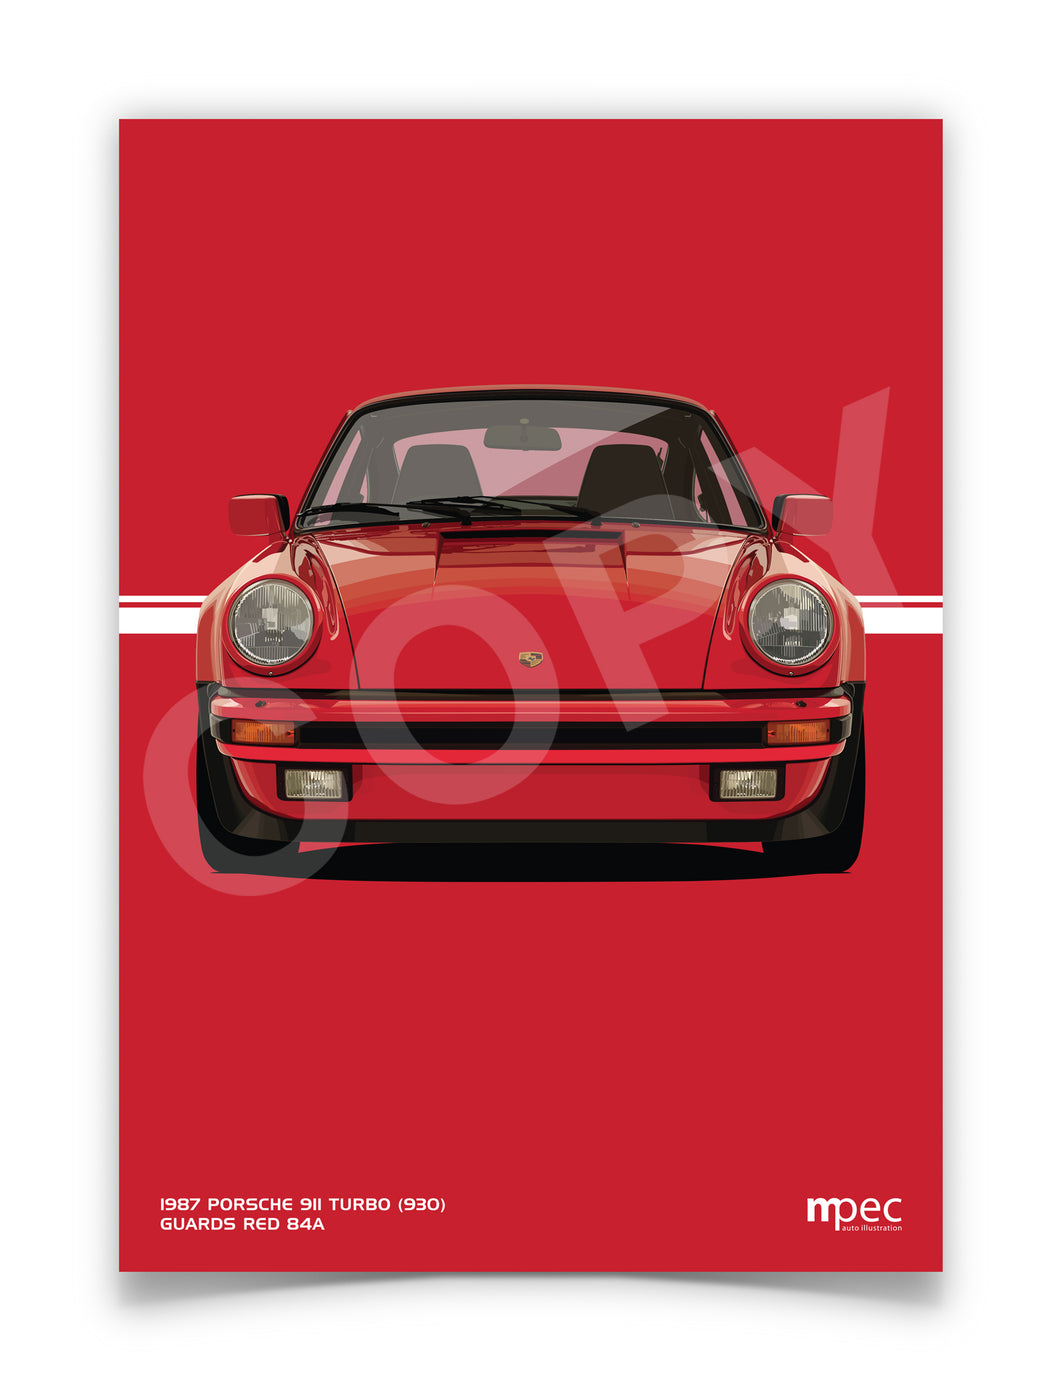 Illustration 1987 Porsche 911 Turbo (930) Guards Red 84A